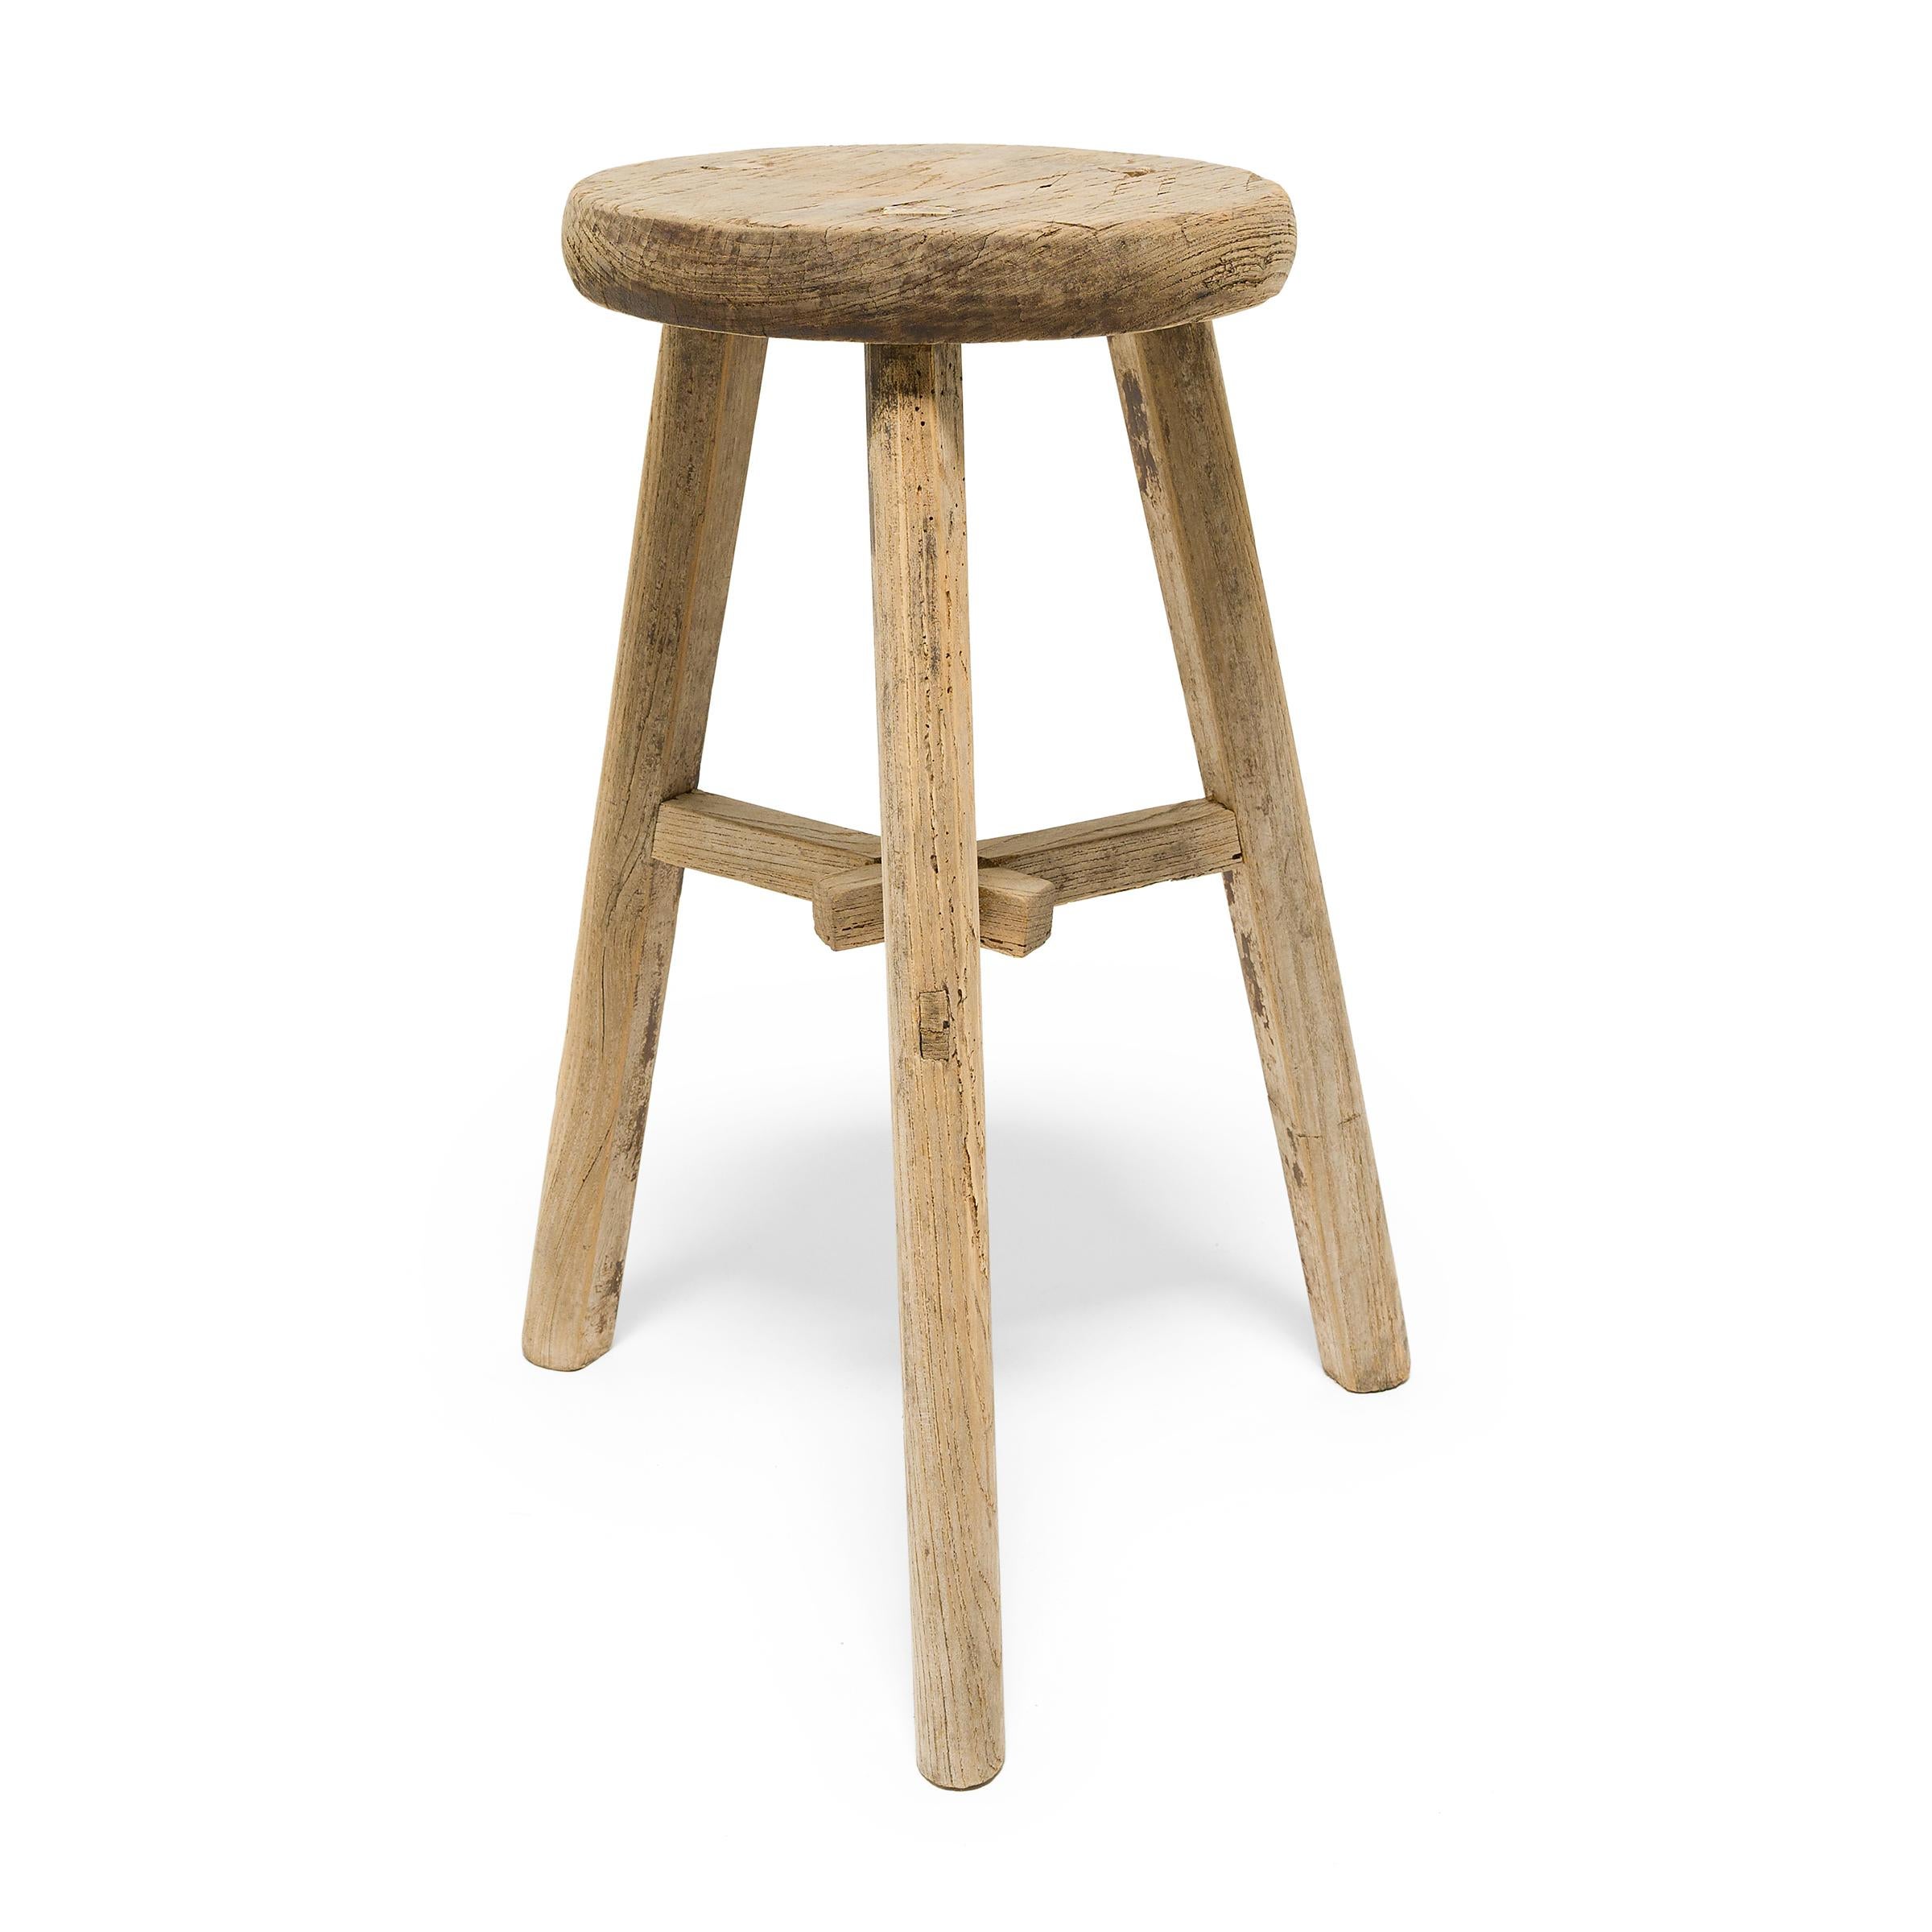 Deceptively simple, this early 20th century stool from Shanxi province shows off the ingenious joinery methods traditionally used by Chinese carpenters. The stool's three splayed legs are supported by stretcher bars that interlock at the center in a